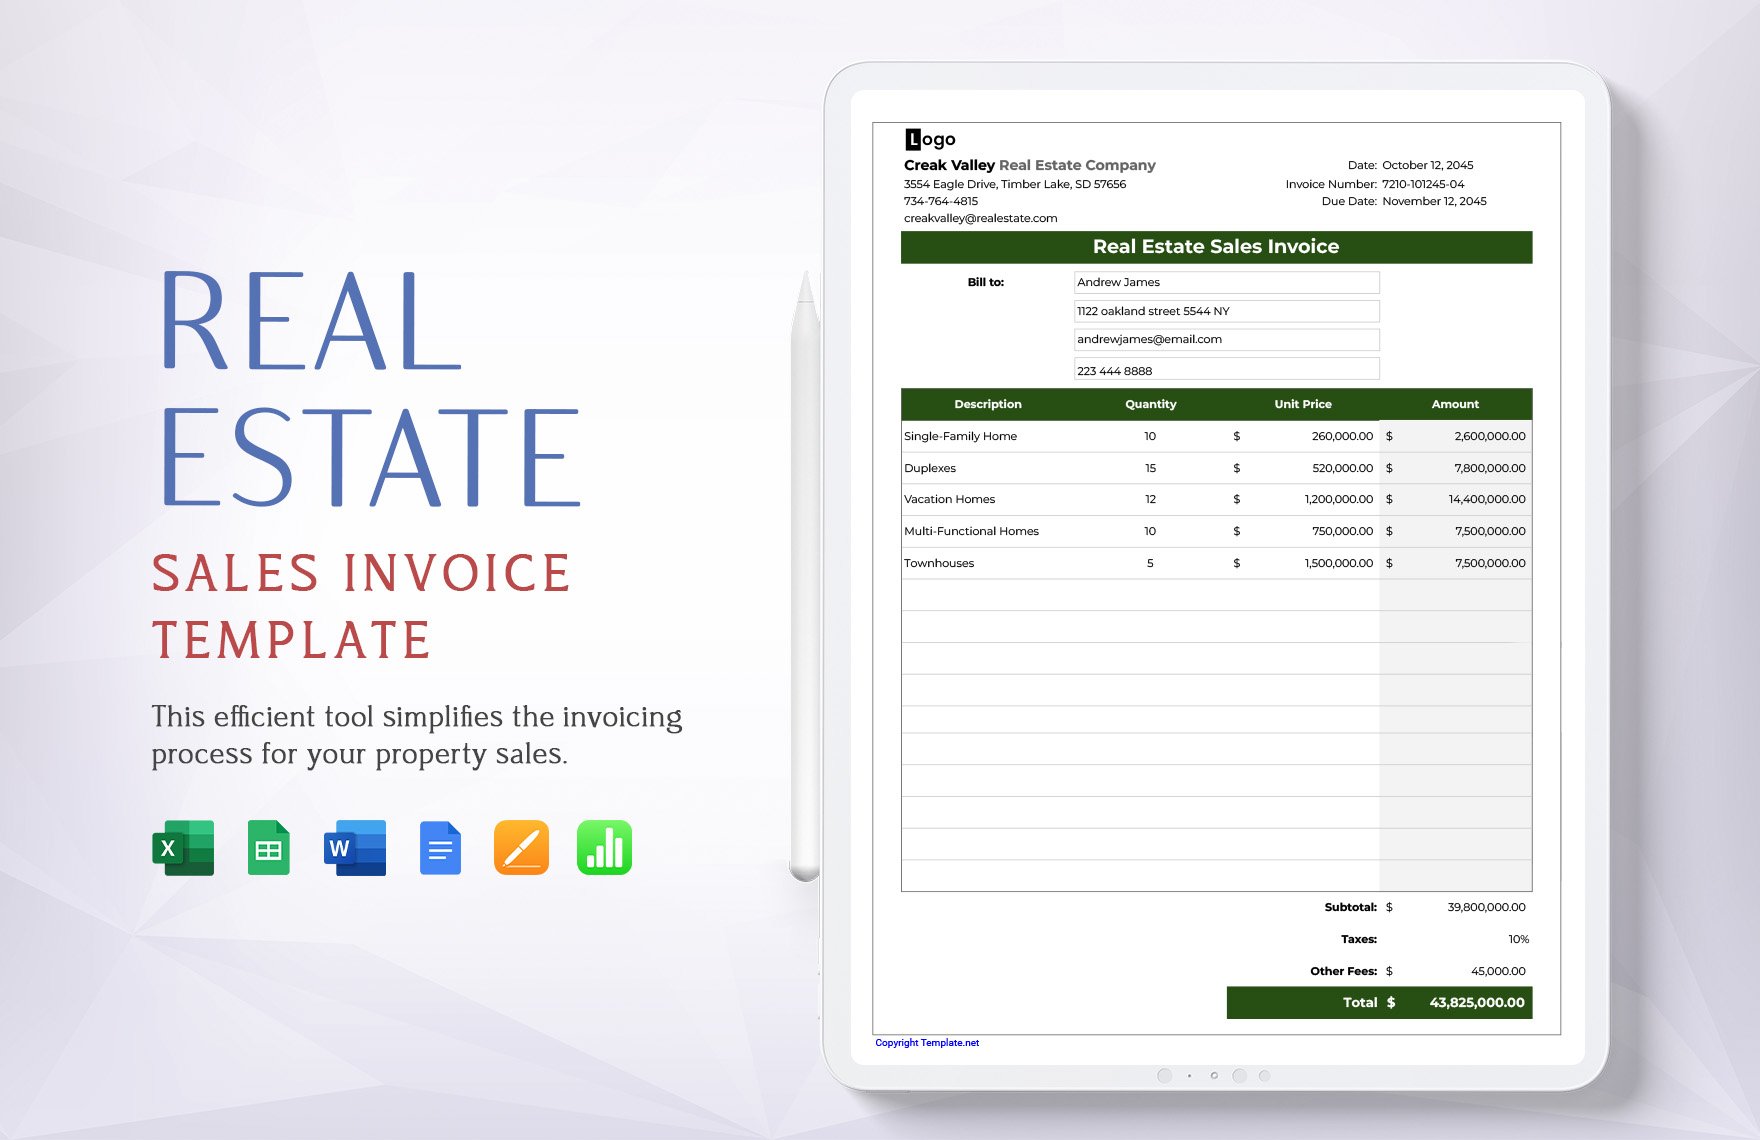 Real Estate Sales Invoice Template in Word, Google Docs, Excel, Google Sheets, Apple Pages, Apple Numbers